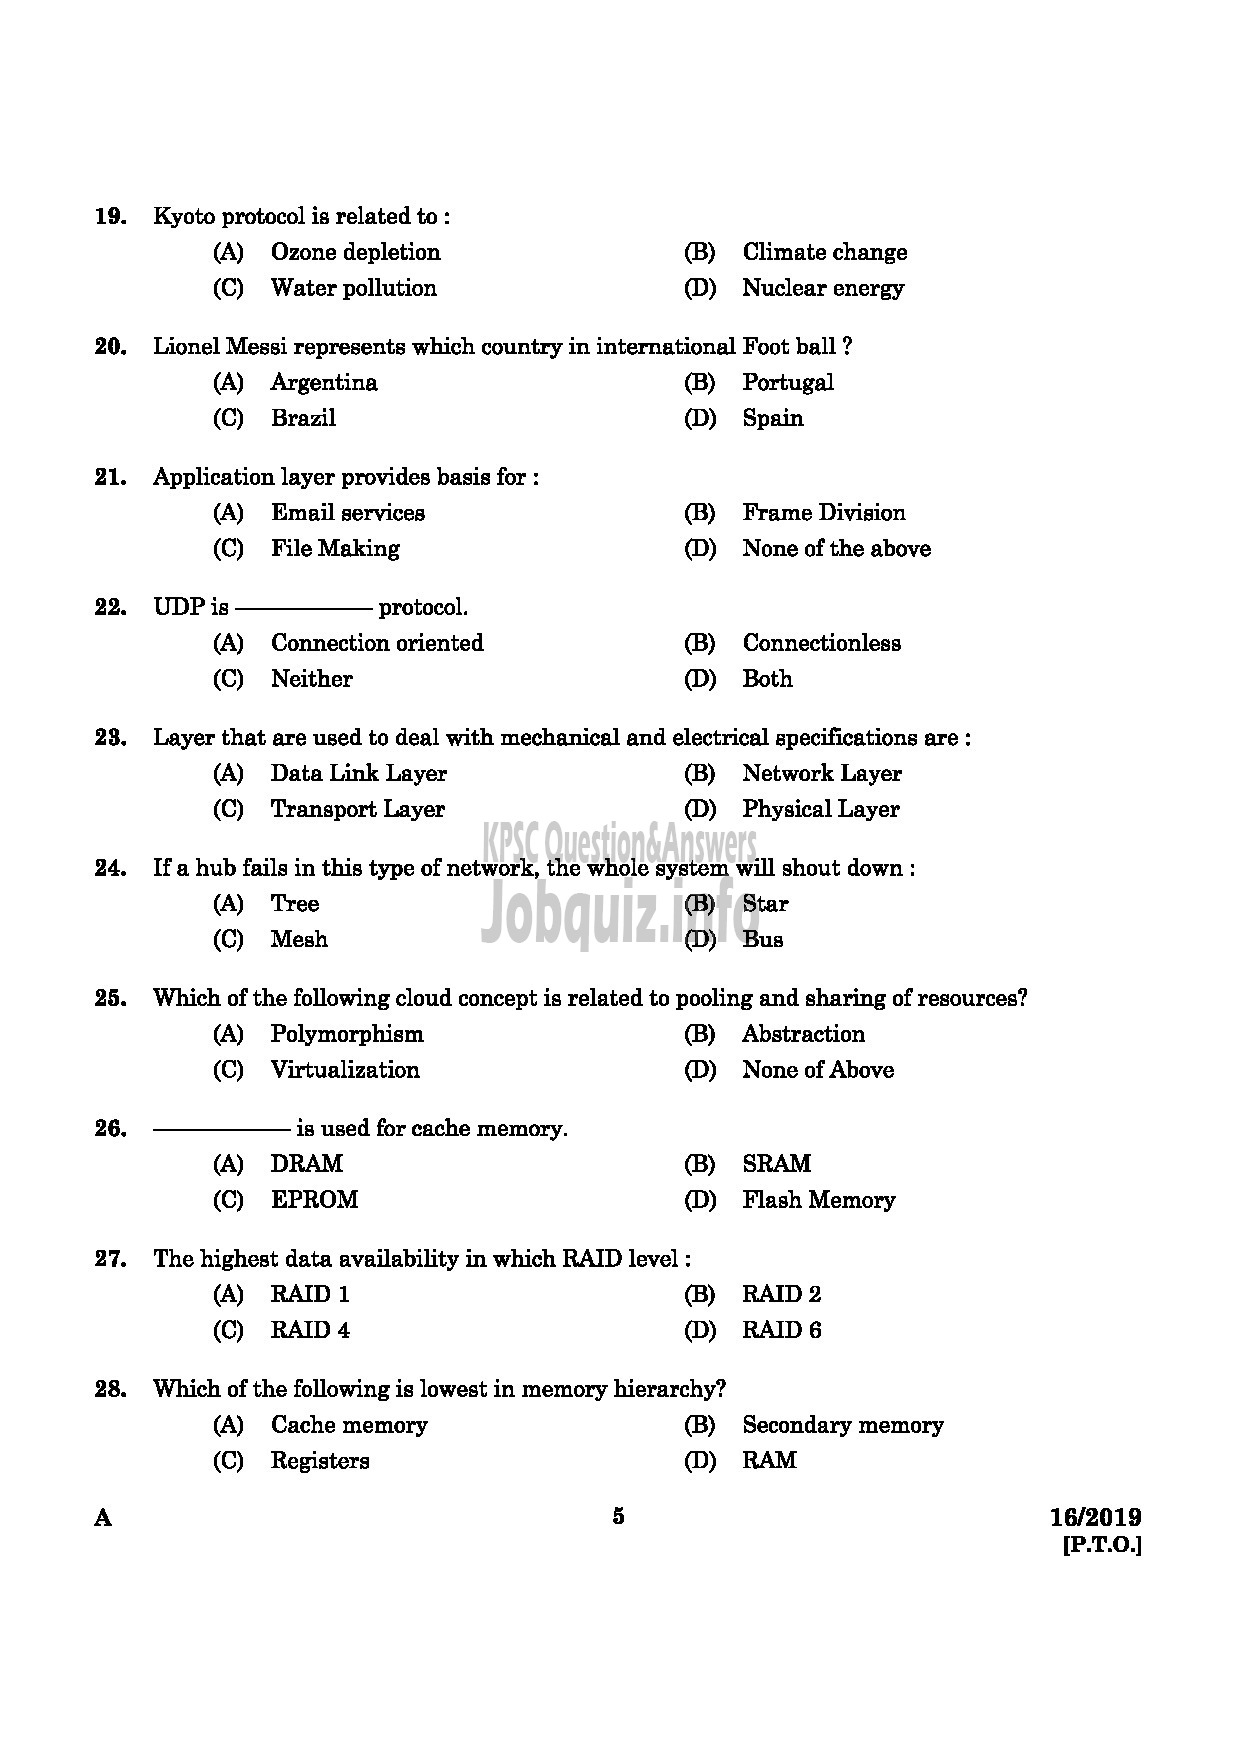 Kerala PSC Question Paper - JUNIOR INSTRUCTOR SOFTWARE TESTING ASSISTANT INDUSTRIAL TRAINING -3